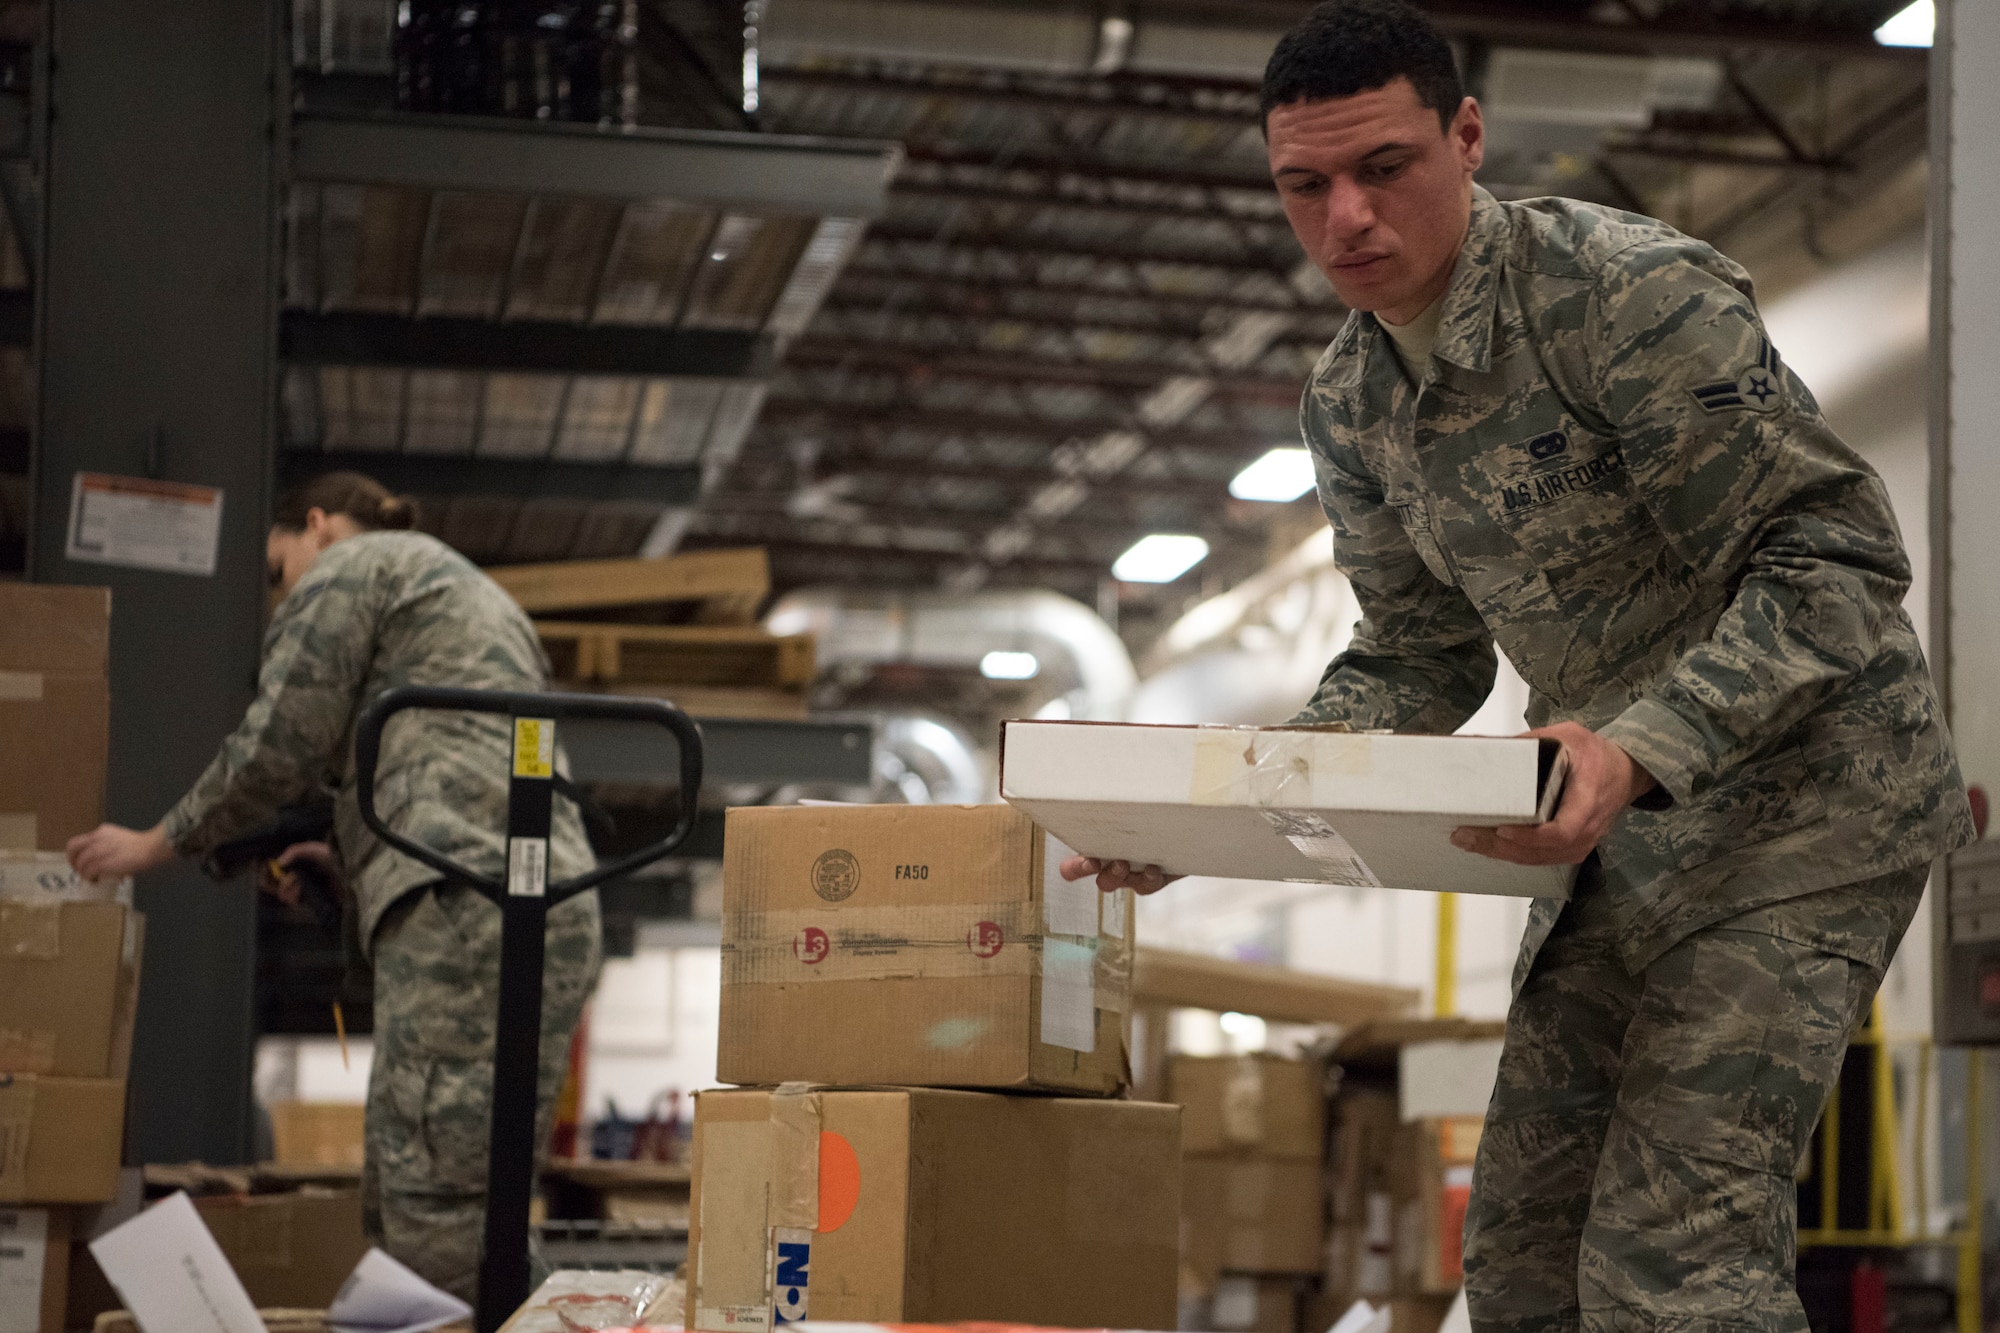 Alaska Air National Guardsmen Airman 1st Class Alan Merritt and Airman 1st Class Lauren Scanlan, both 176th Logistics Readiness Squadron ground transportation personnel, prepare a shipment of items for delivery, March 11, 2019, at Joint Base Elmendorf-Richardson, Alaska. In one of the newest total force integration associations of its kind, the 673d Logistics Readiness Squadron Materiel Management flight is conducting a complete C-17 aircraft supply turnover to the 176th LRS.